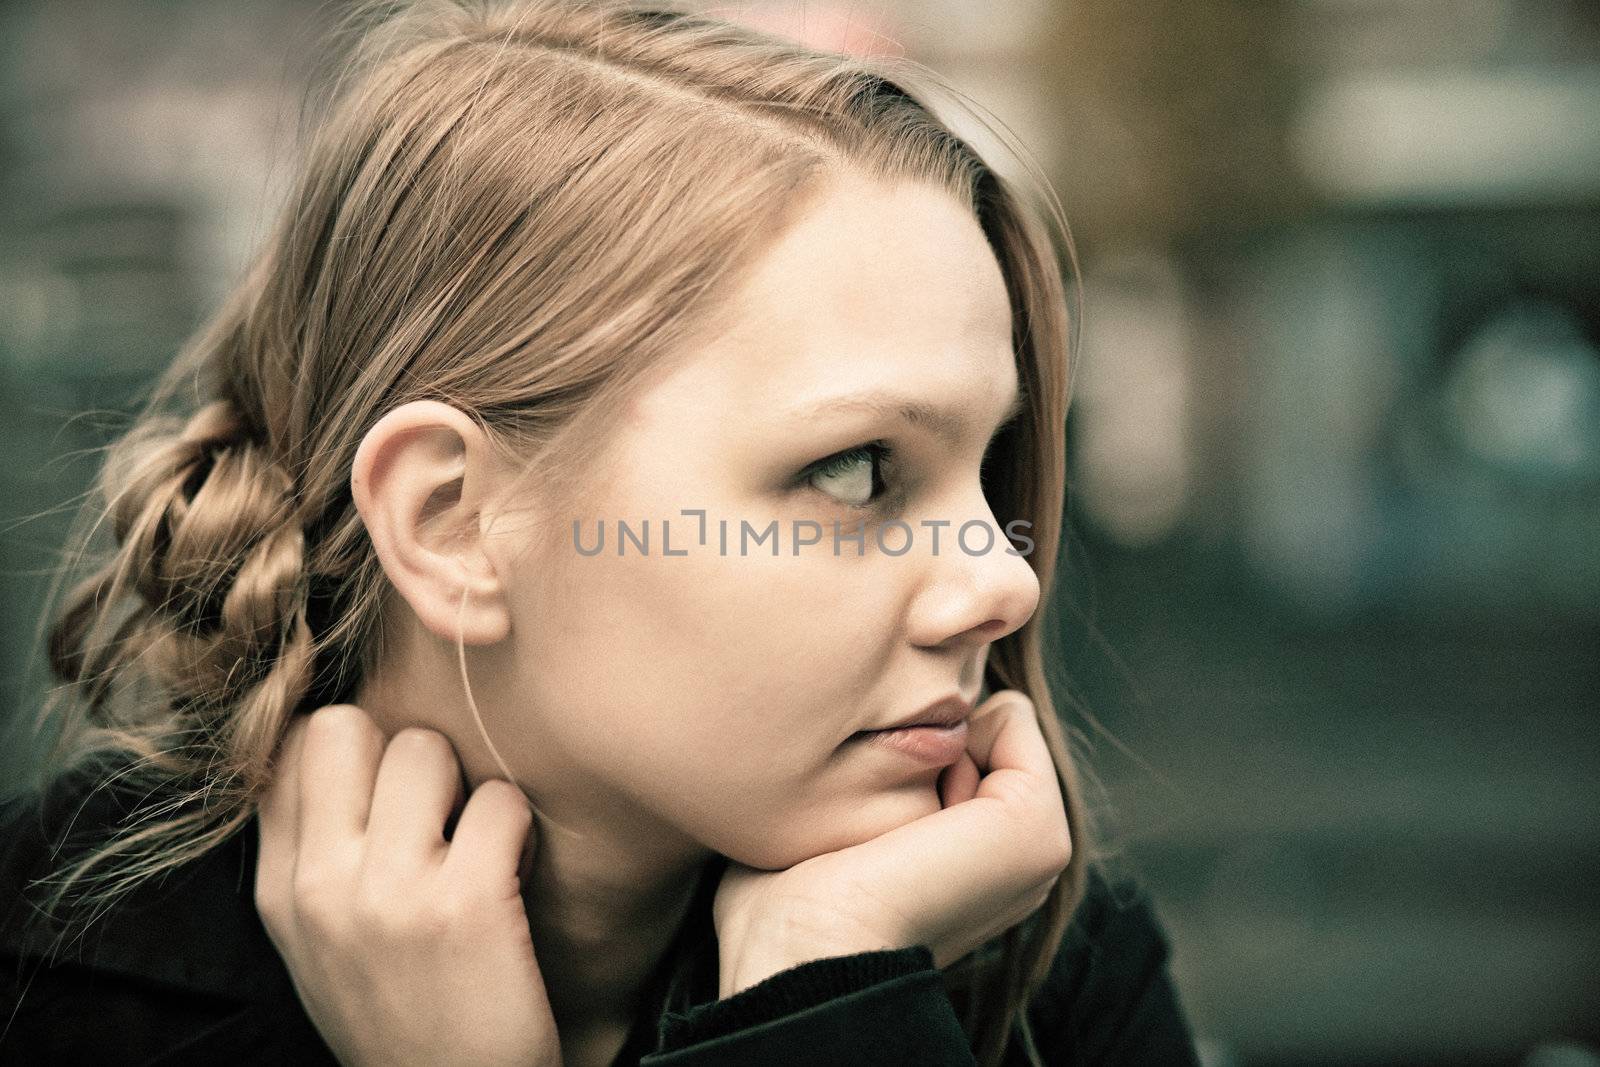 Profile of a pensive young blond woman, desaturated, film grain